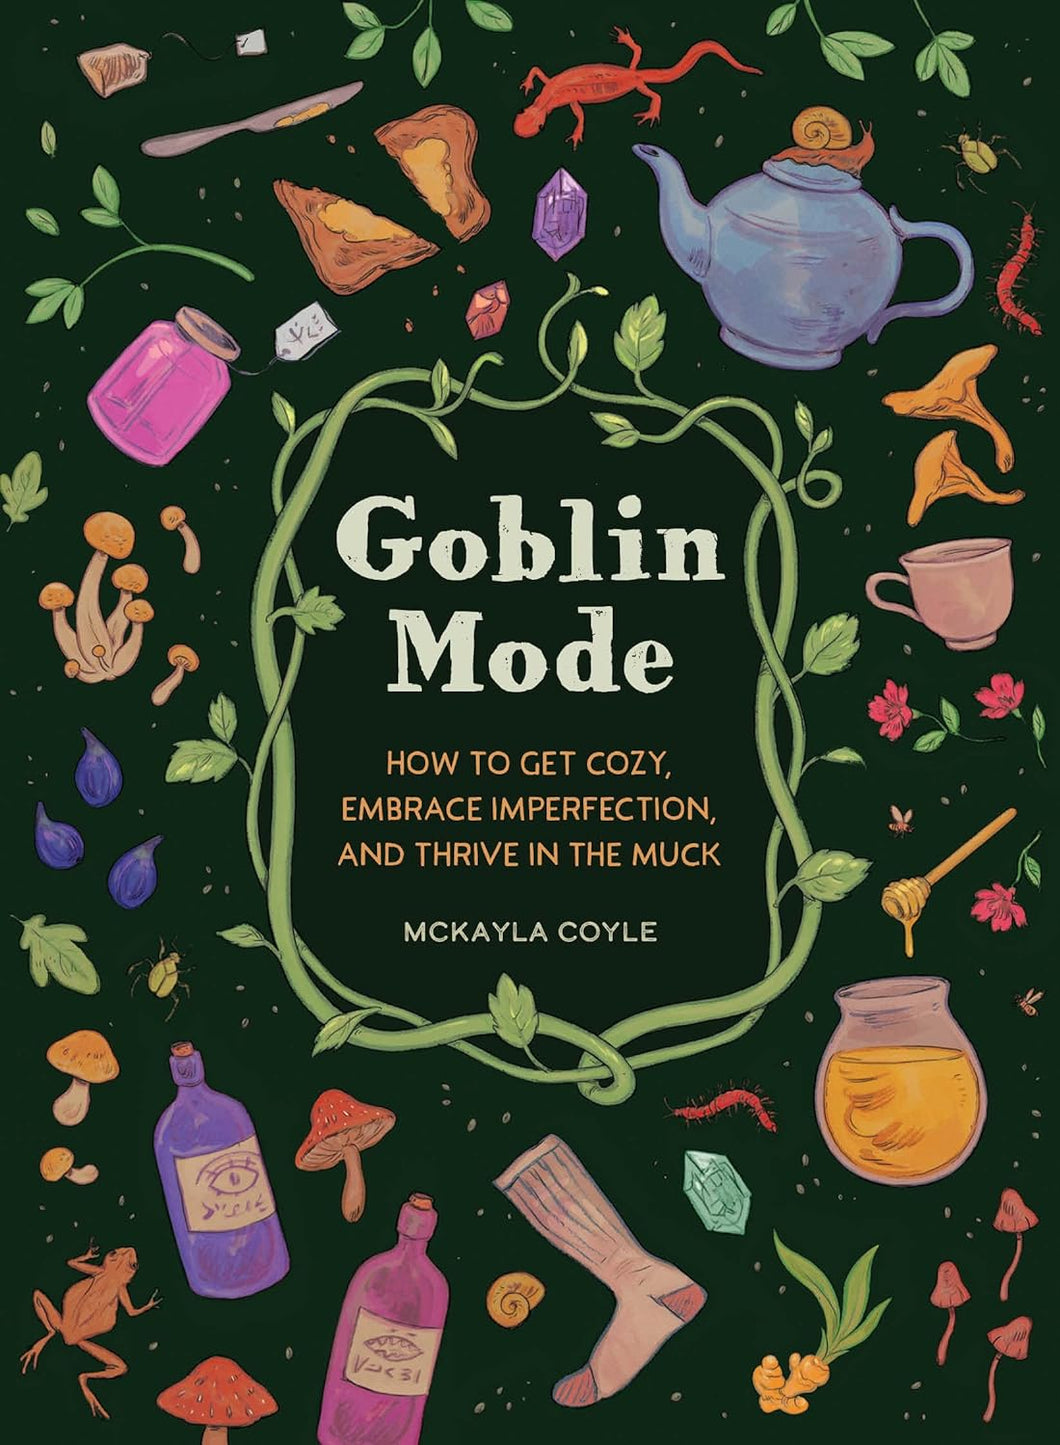 Goblin Mode: How To Get Cozy, Embrace Imperfection, and Thrive In The Muck [McKayla Coyle]